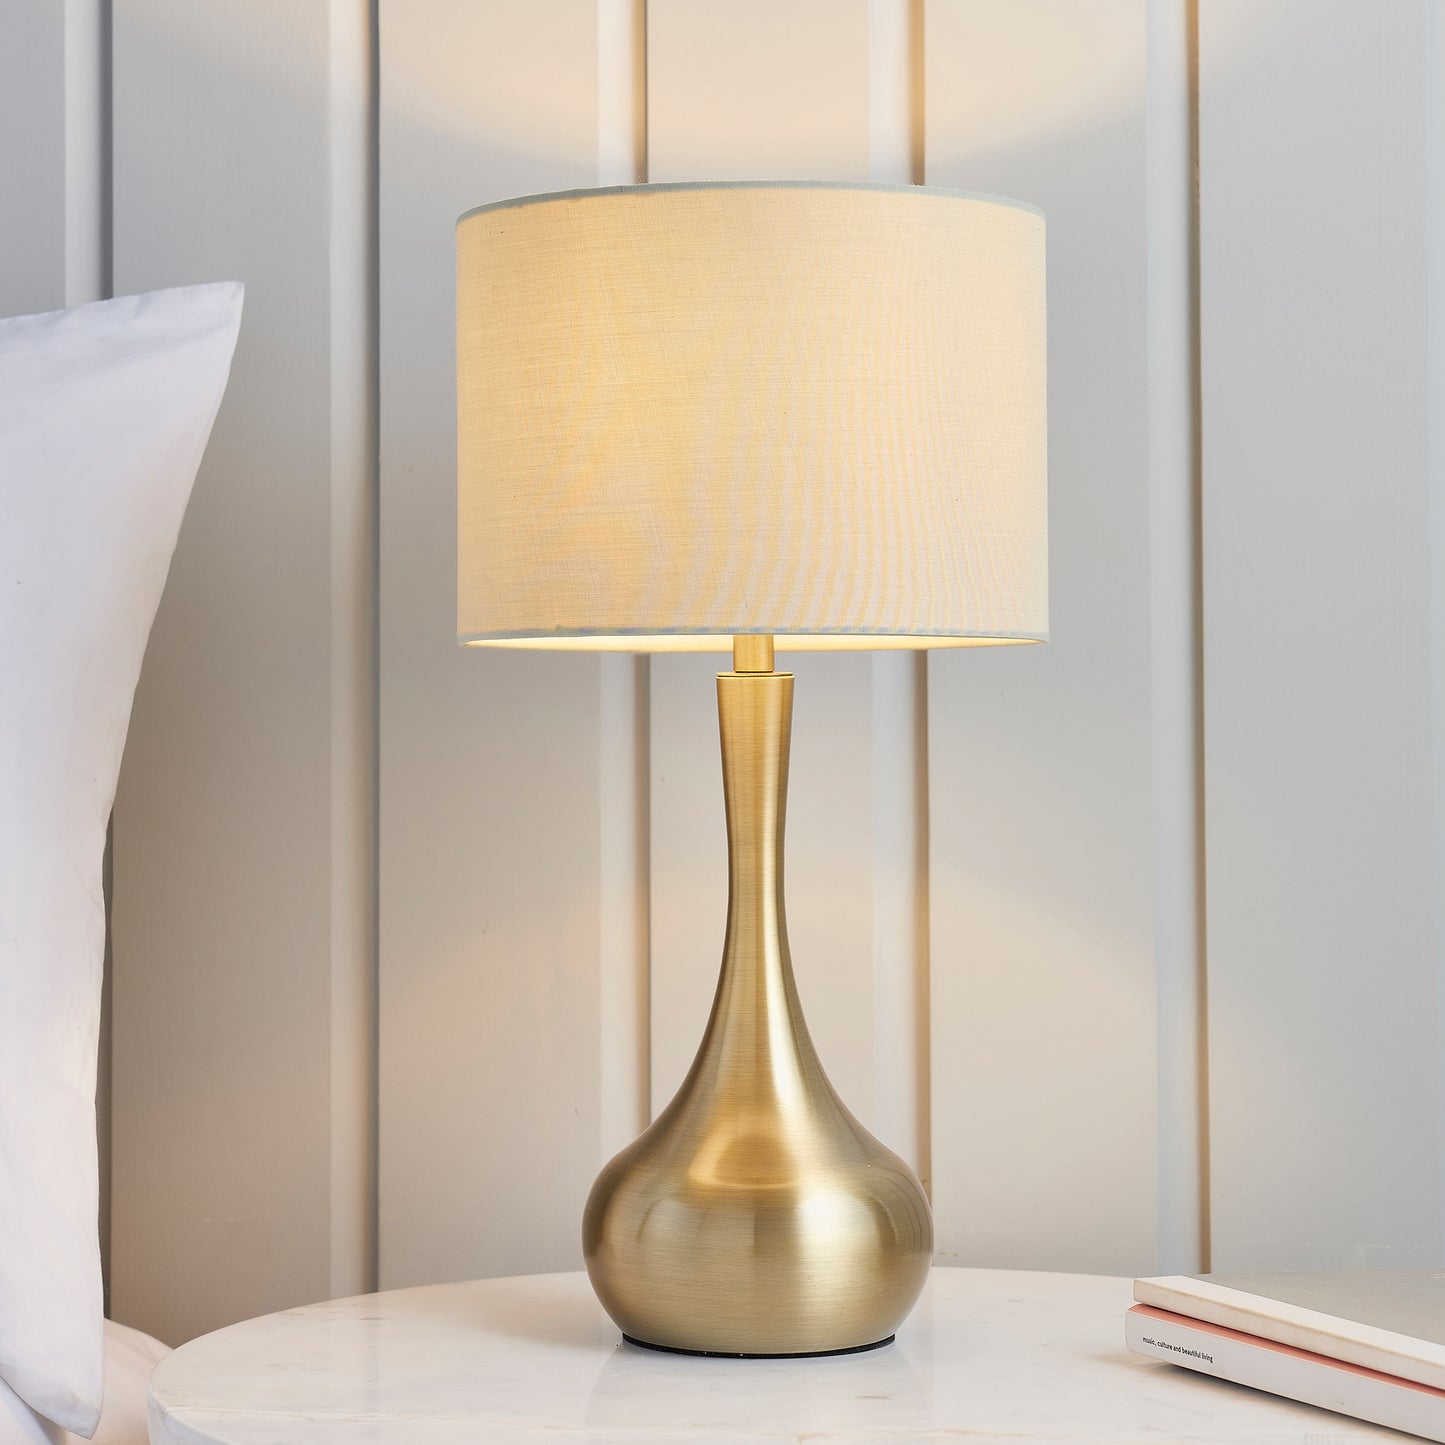 Load image into Gallery viewer, A brass and taupe Piccadilly table lamp from Kikiathome.co.uk enhances the interior decor of a white bed.
